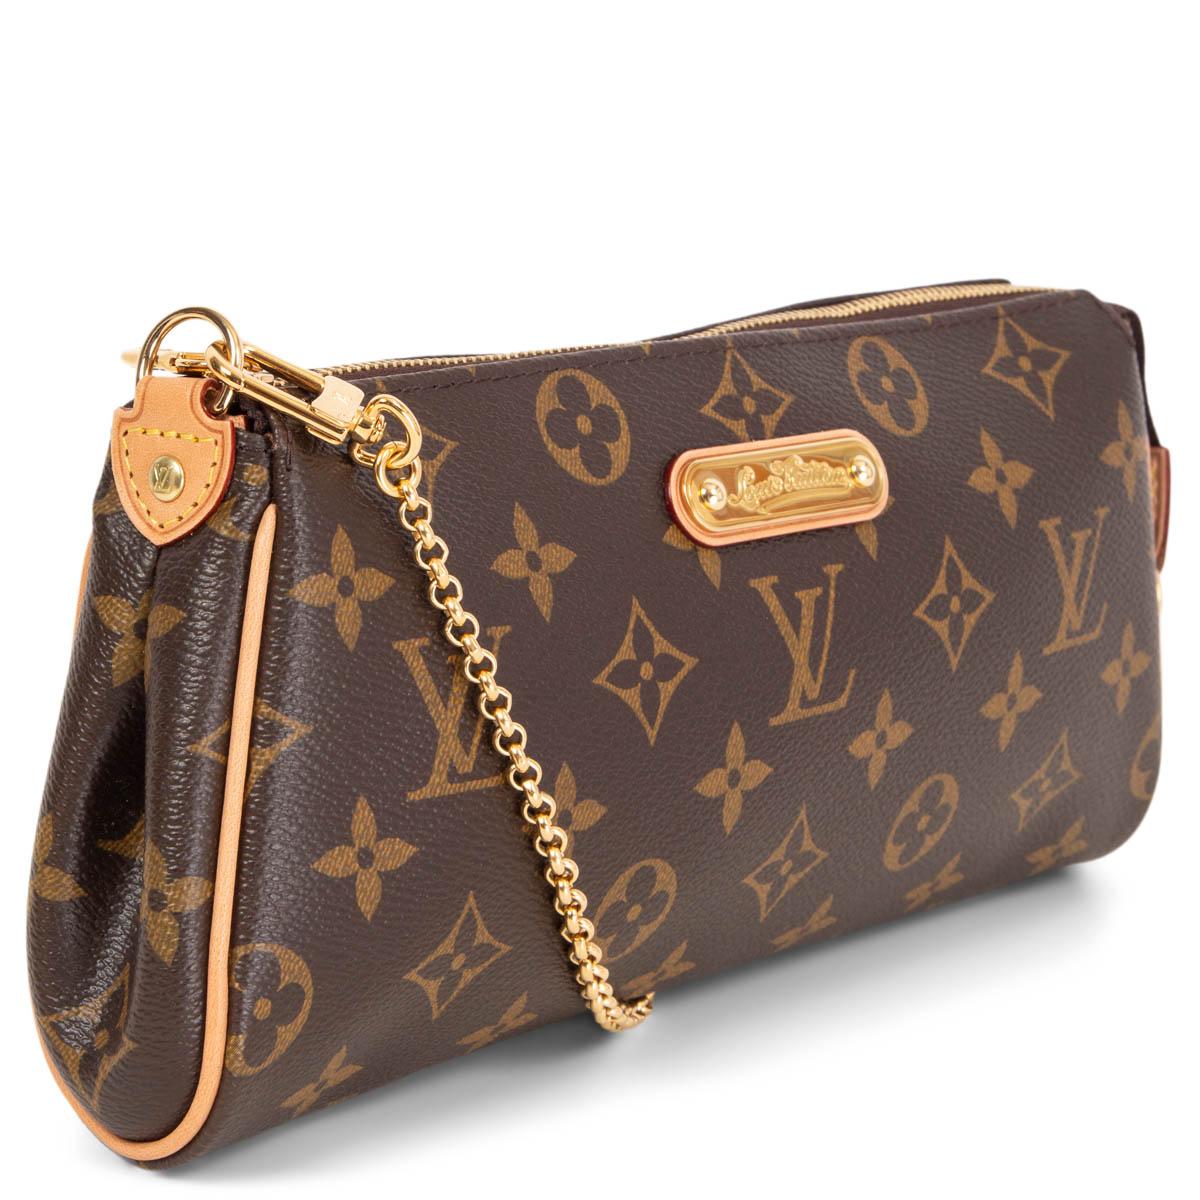 100% authentic Louis Vuitton Eva Monogram Canvas Clutch Bag in brown and camel featuring Vachetta leather trimming and gold-tone metal chain shoulder-strap. Leather shoulder-strap is missing. Has been carried and is in excellent condition. Comes